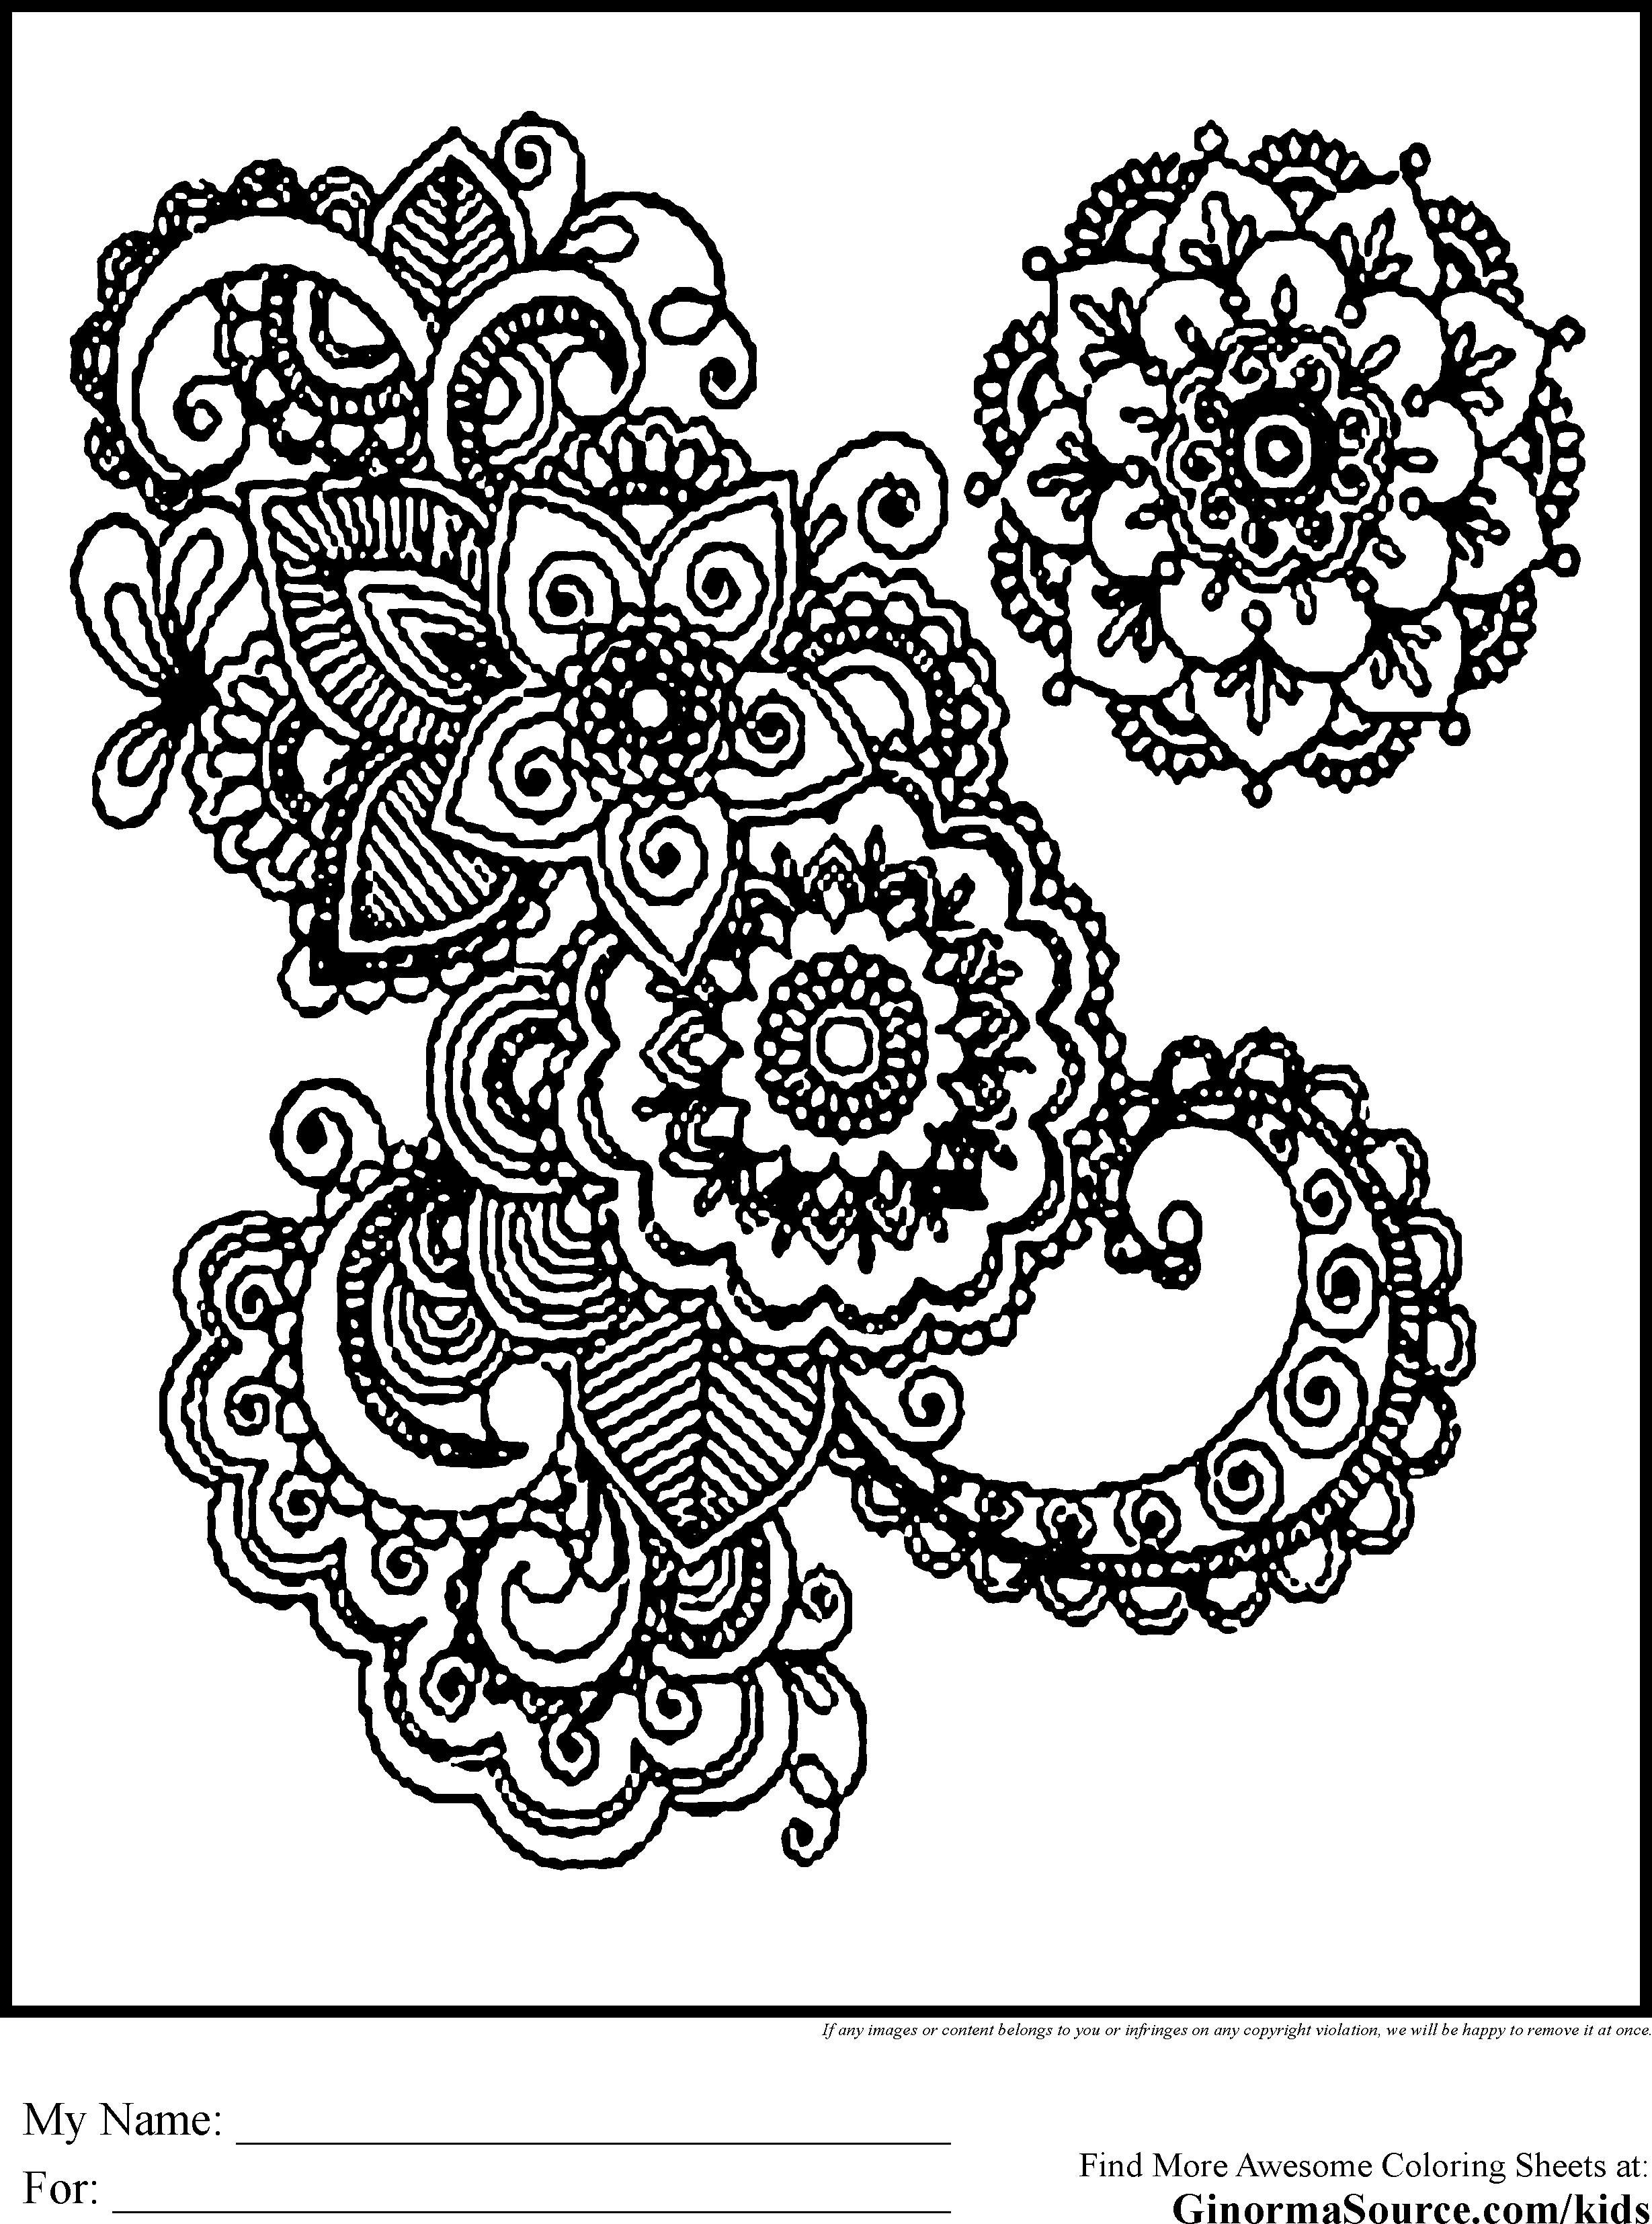 Coloring Pages: Very Detailed Coloring Pages Printable Coloring ...